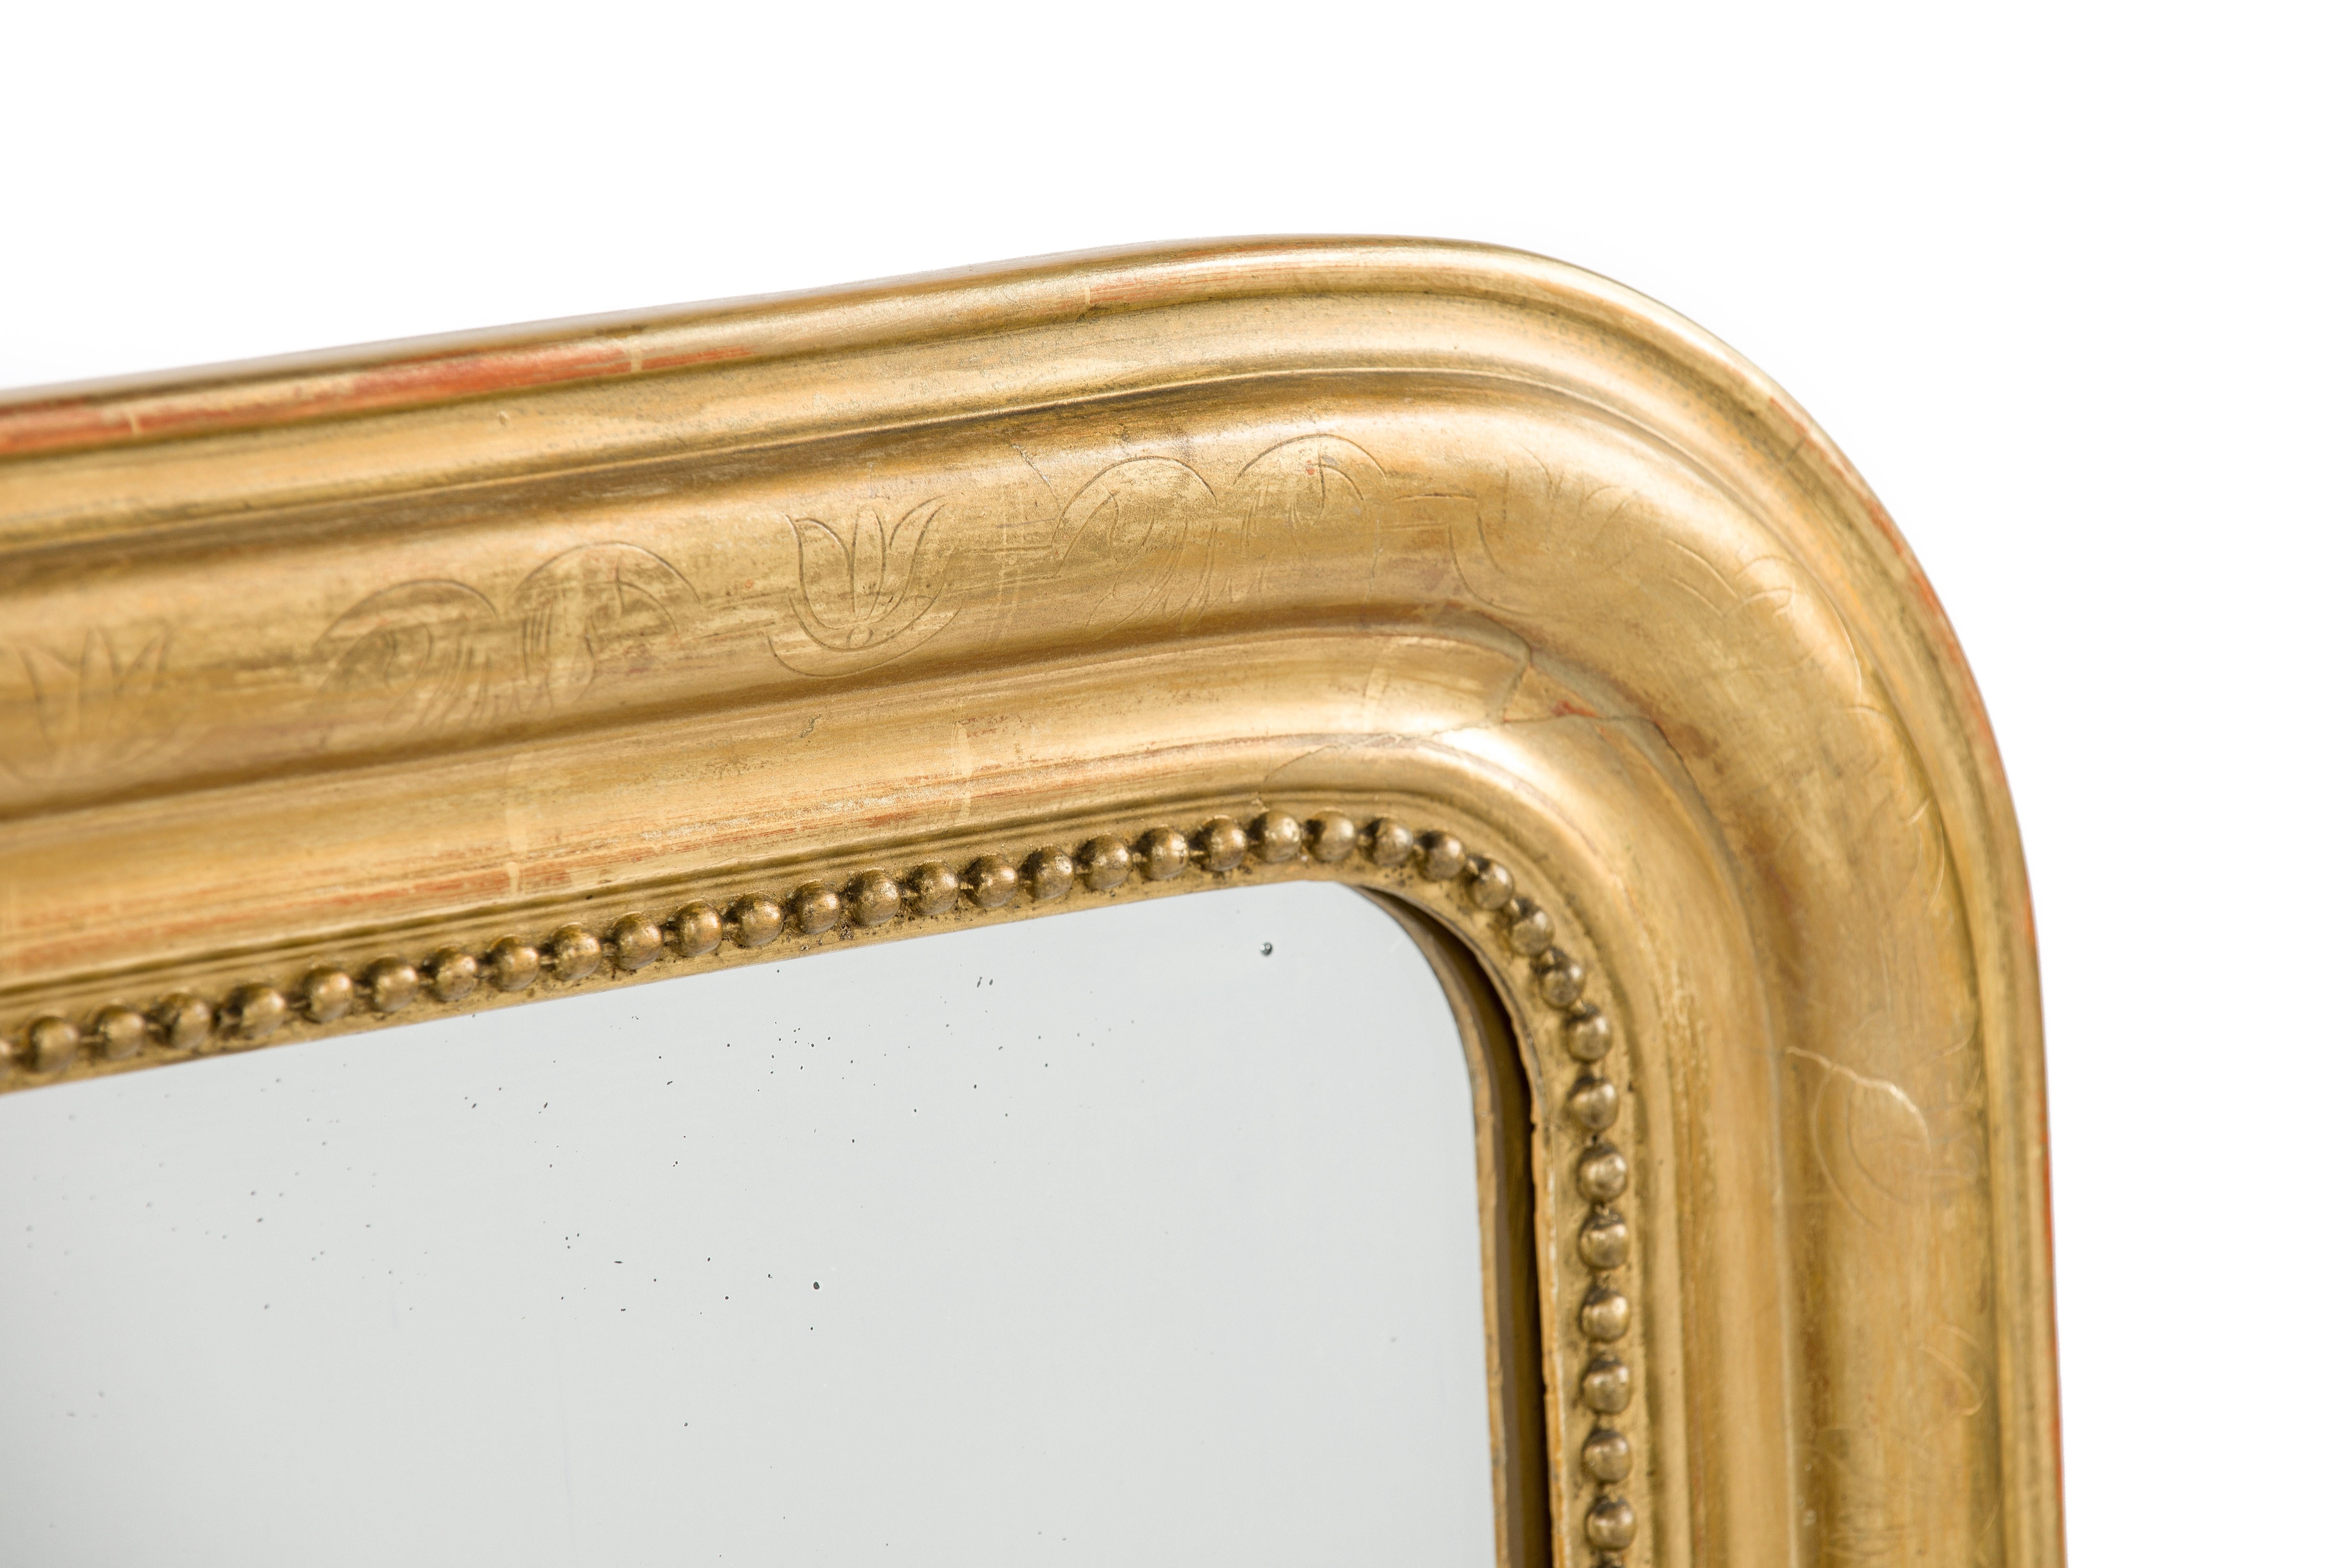 This is a beautiful completely gold leaf gilt Louis Philippe mirror. It features the upper rounded corners typical for Louis Philippe mirrors. The frame is decorated with a floral engraving on the most elevated part of the frame. A pearl beading